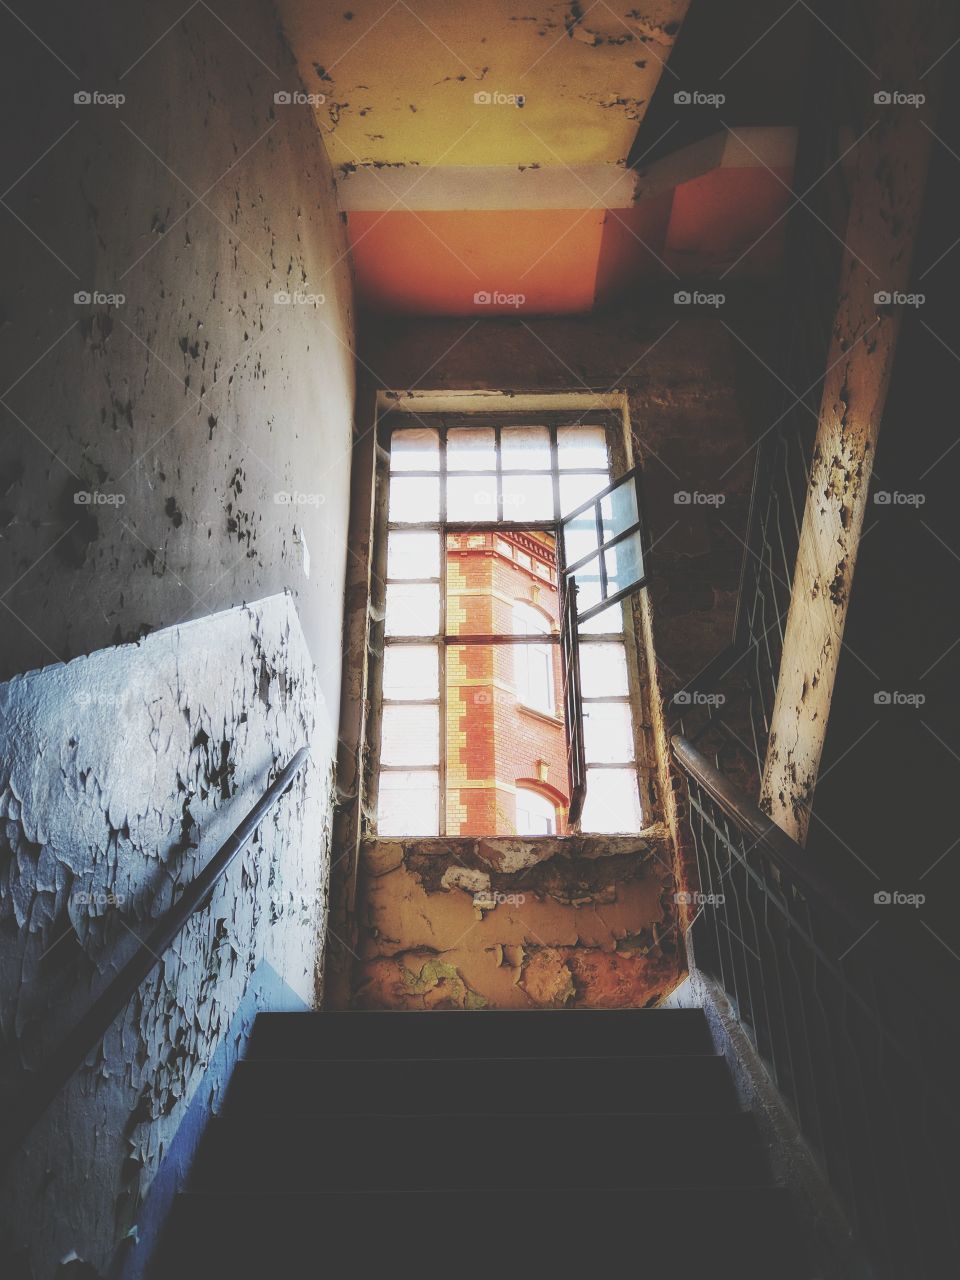 No Person, Architecture, Window, Abandoned, Light